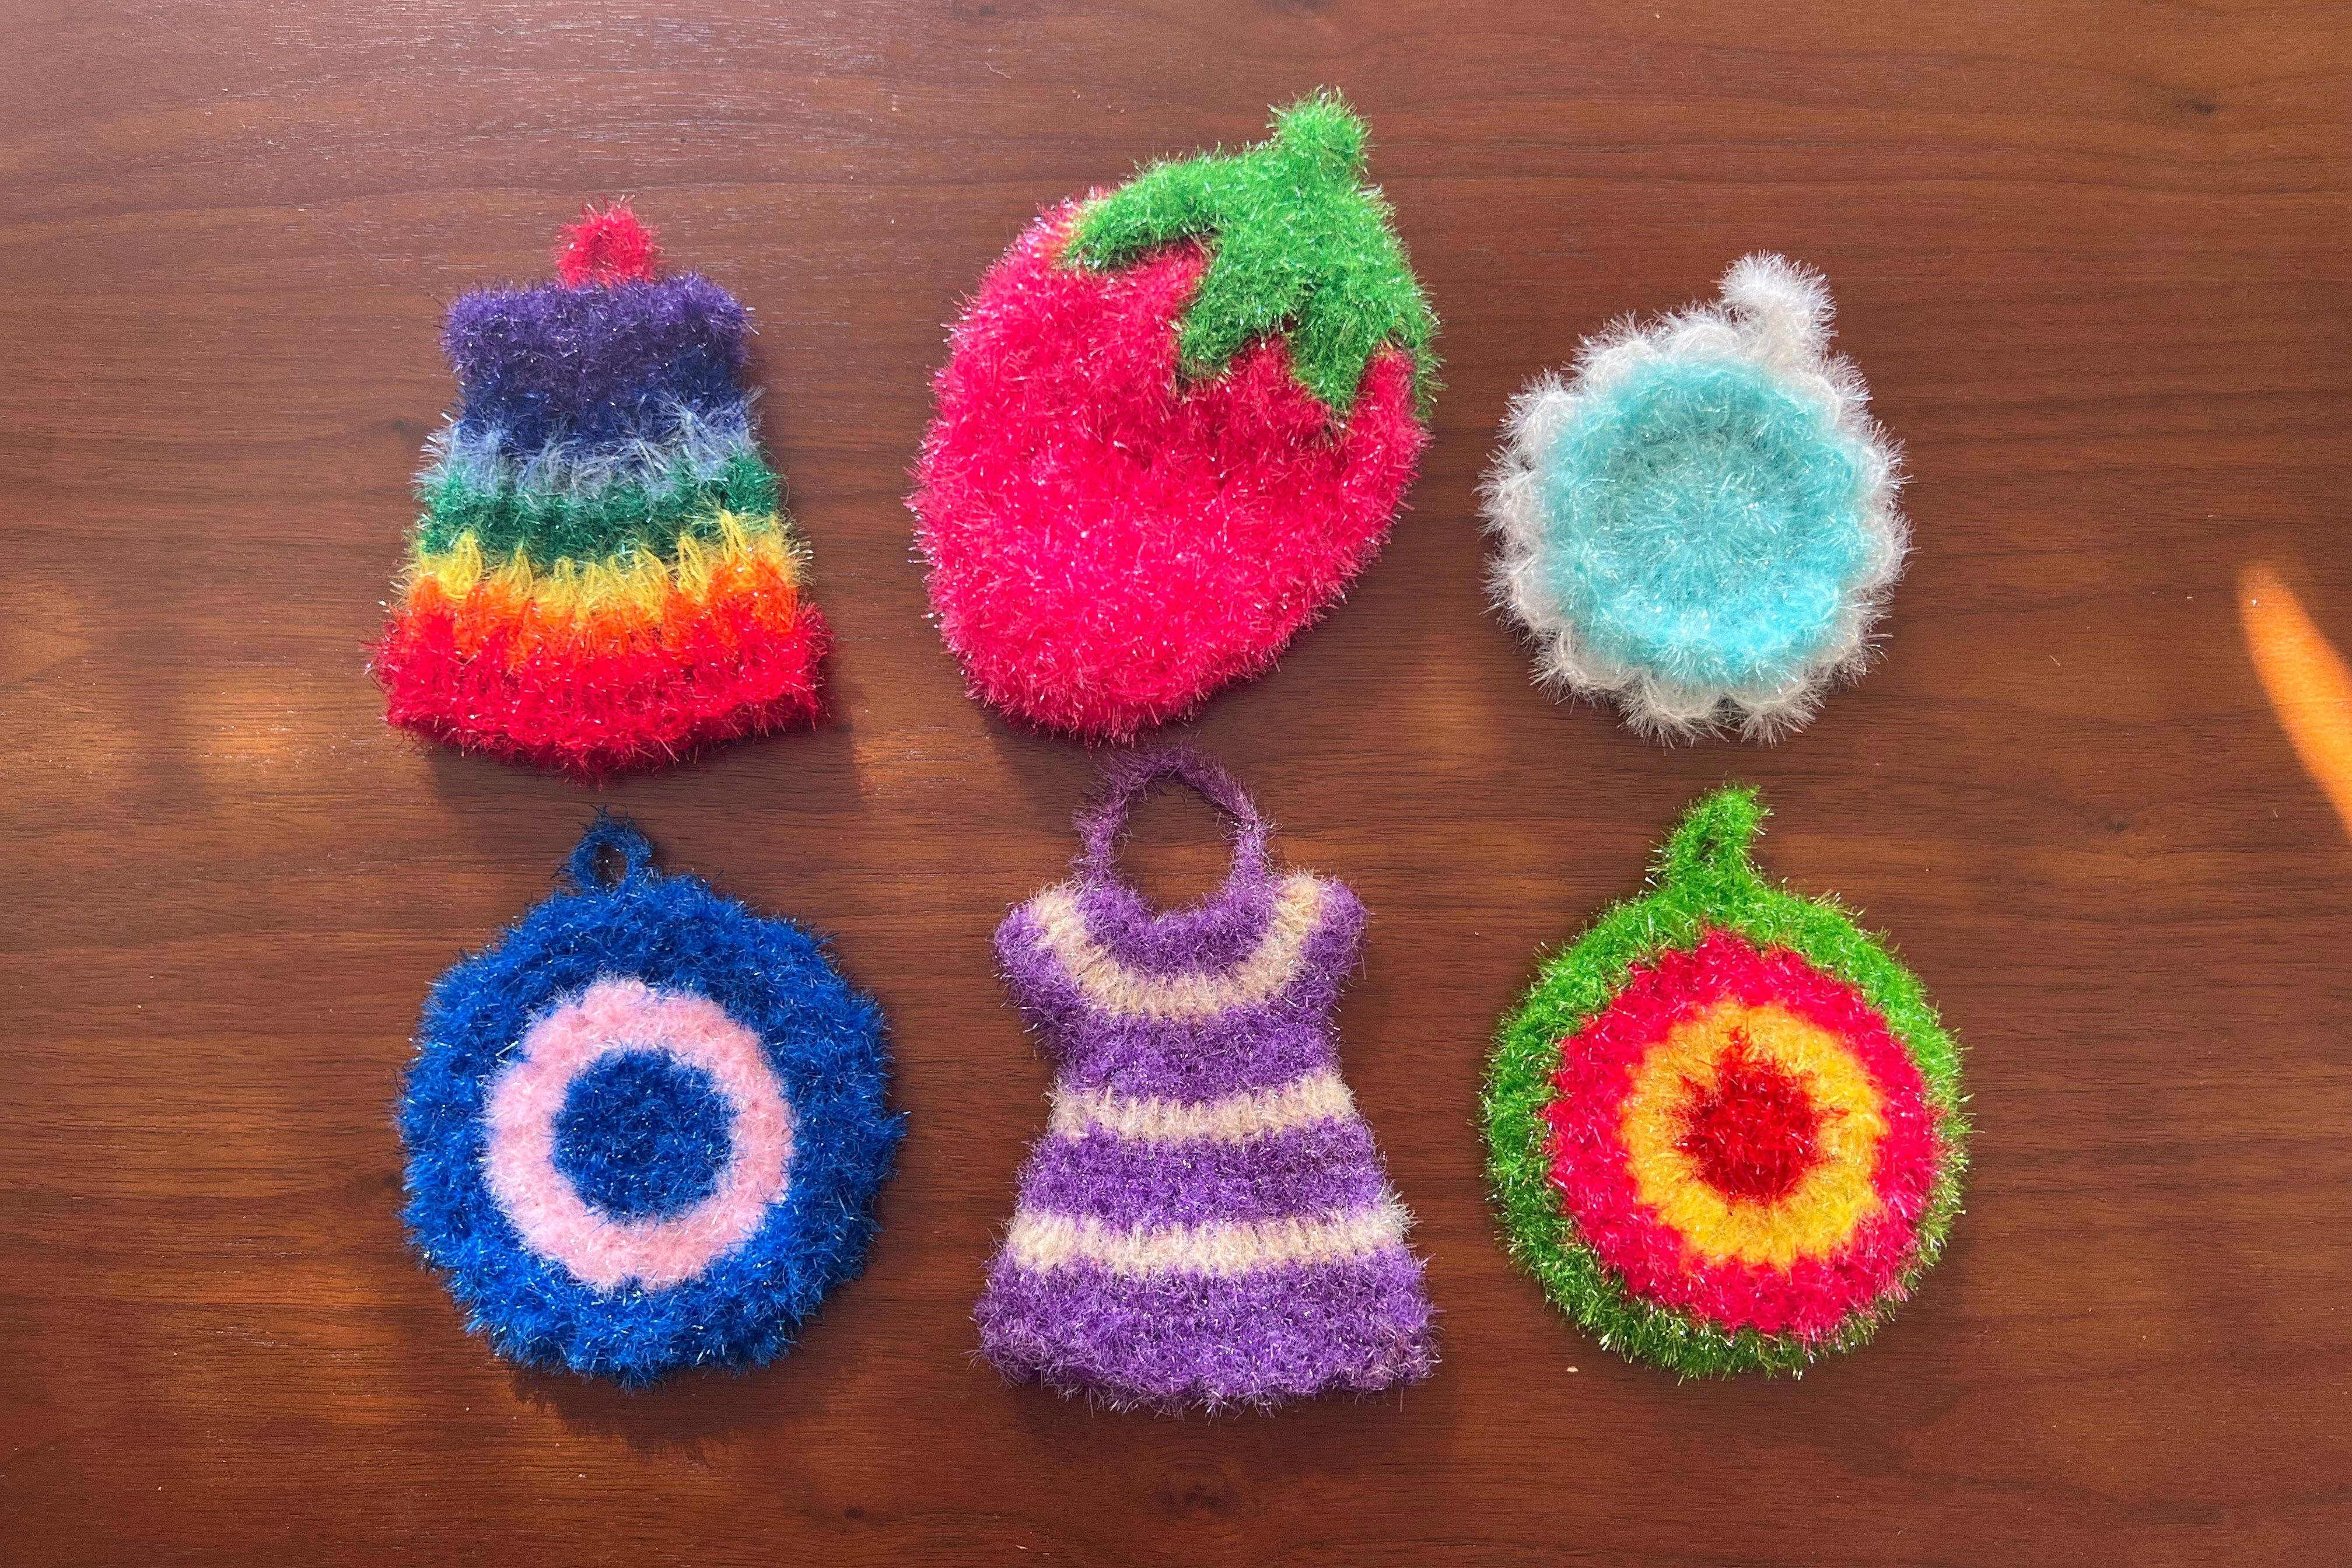 A new fun video pattern is available! These scrubbies are perfect